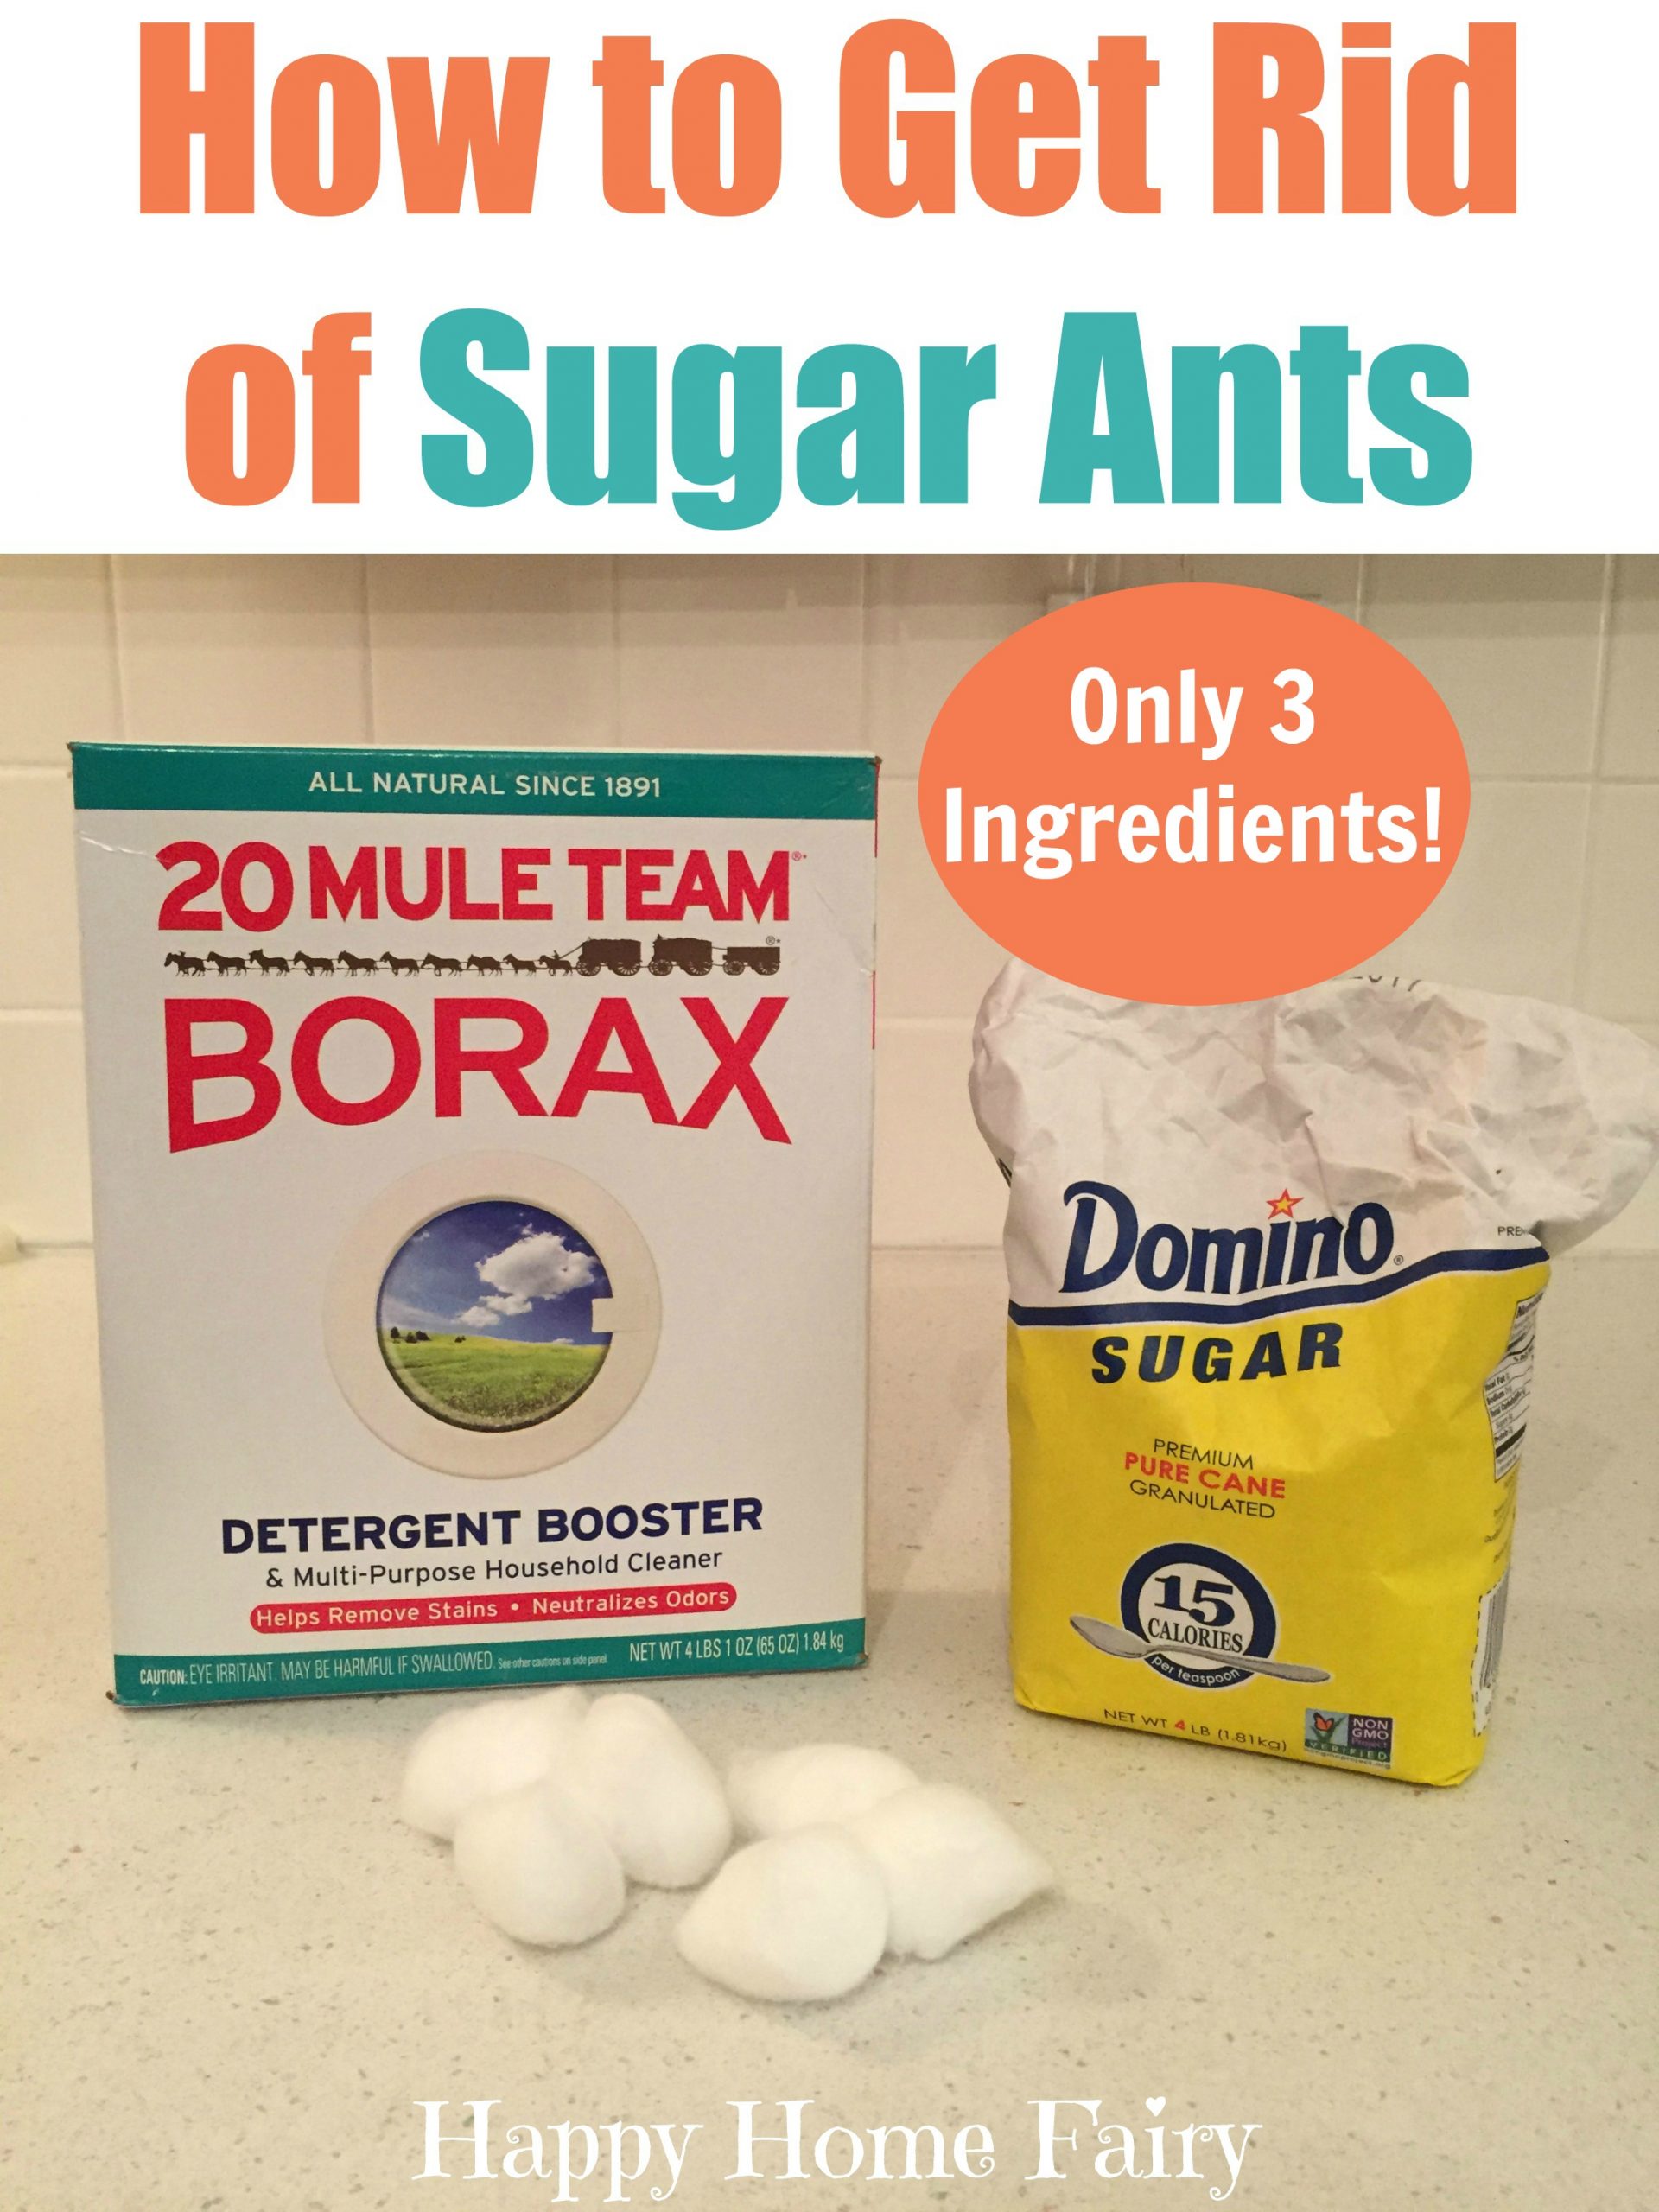 How to Get Rid of Sugar Ants With Just 3 Ingredients!